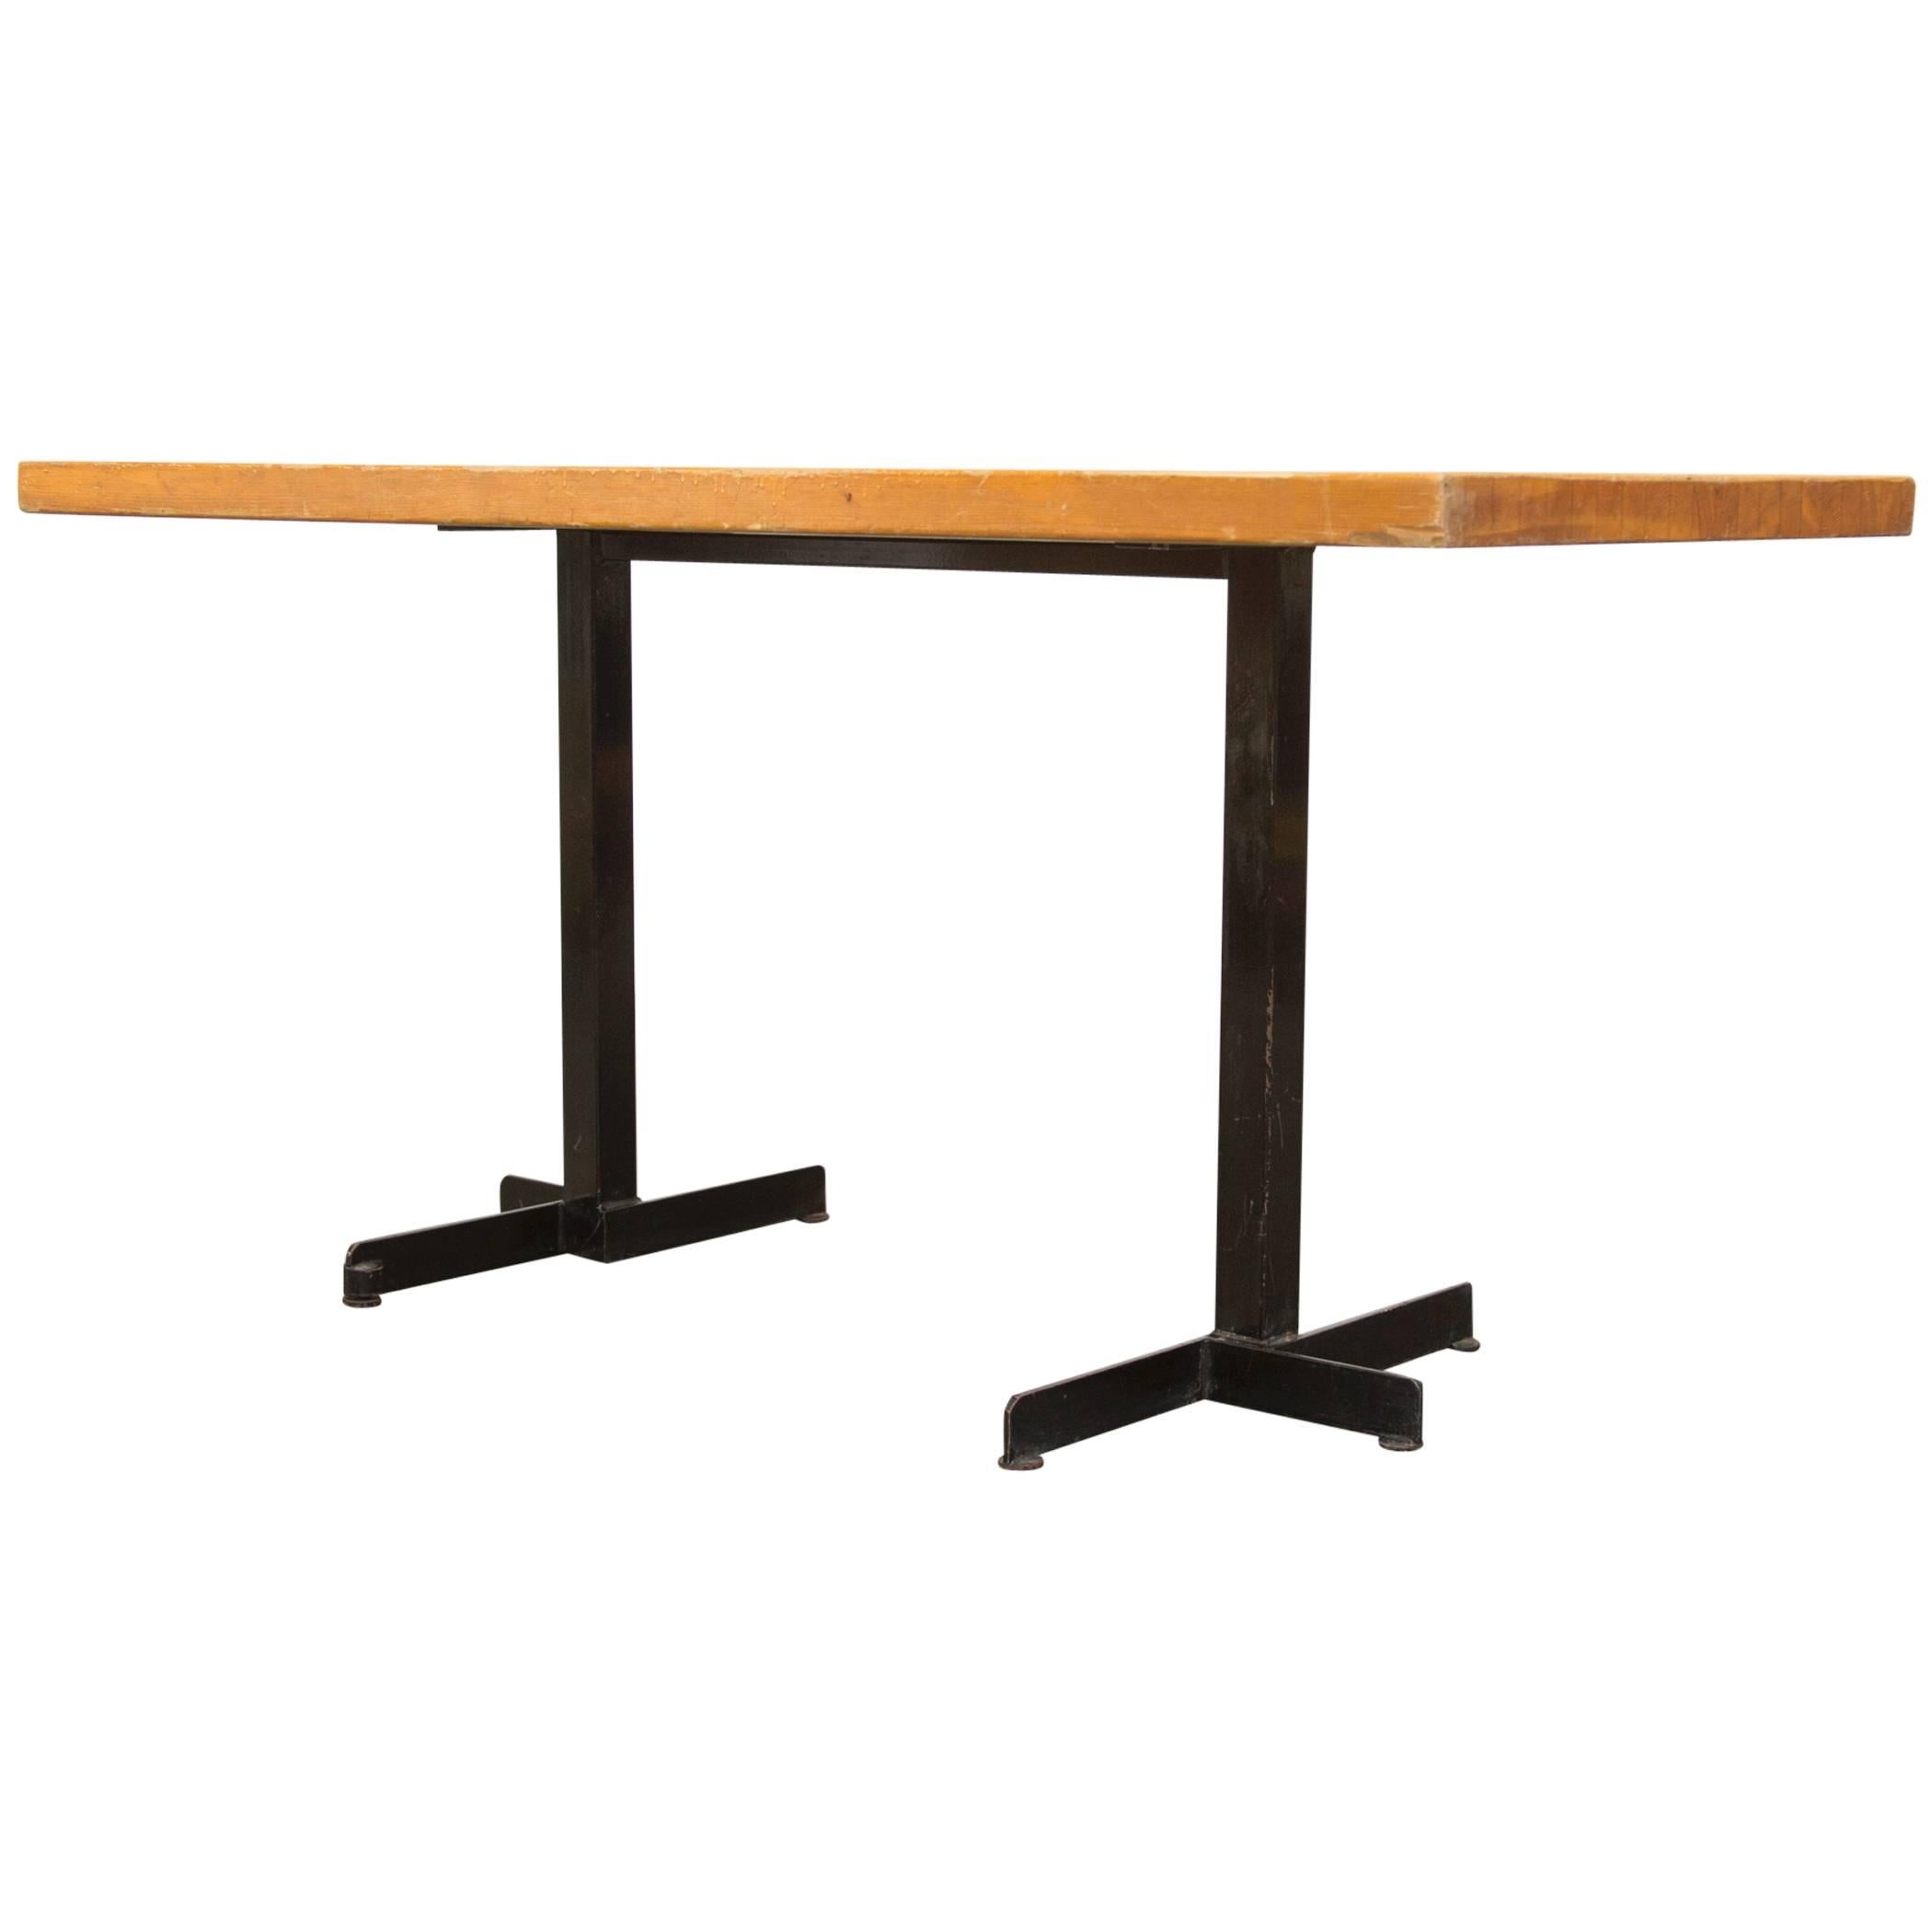 Pine and Black Metal Frame Charlotte Perriand Table for Les Arcs